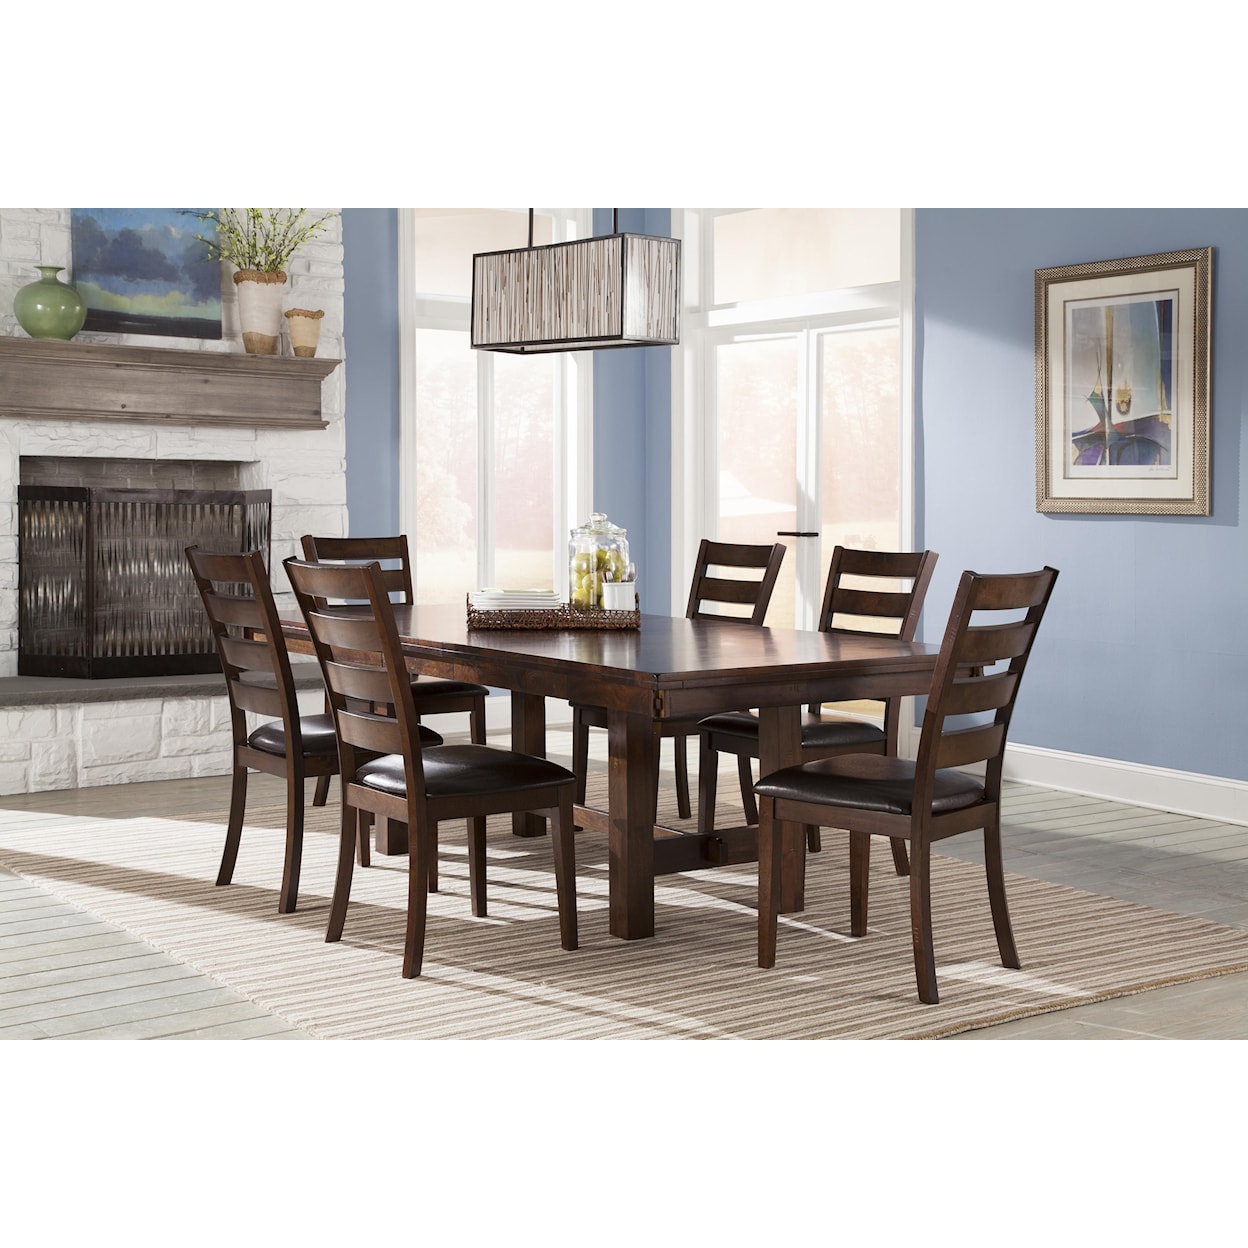 Intercon Kona 7 Piece Table and Chair Set